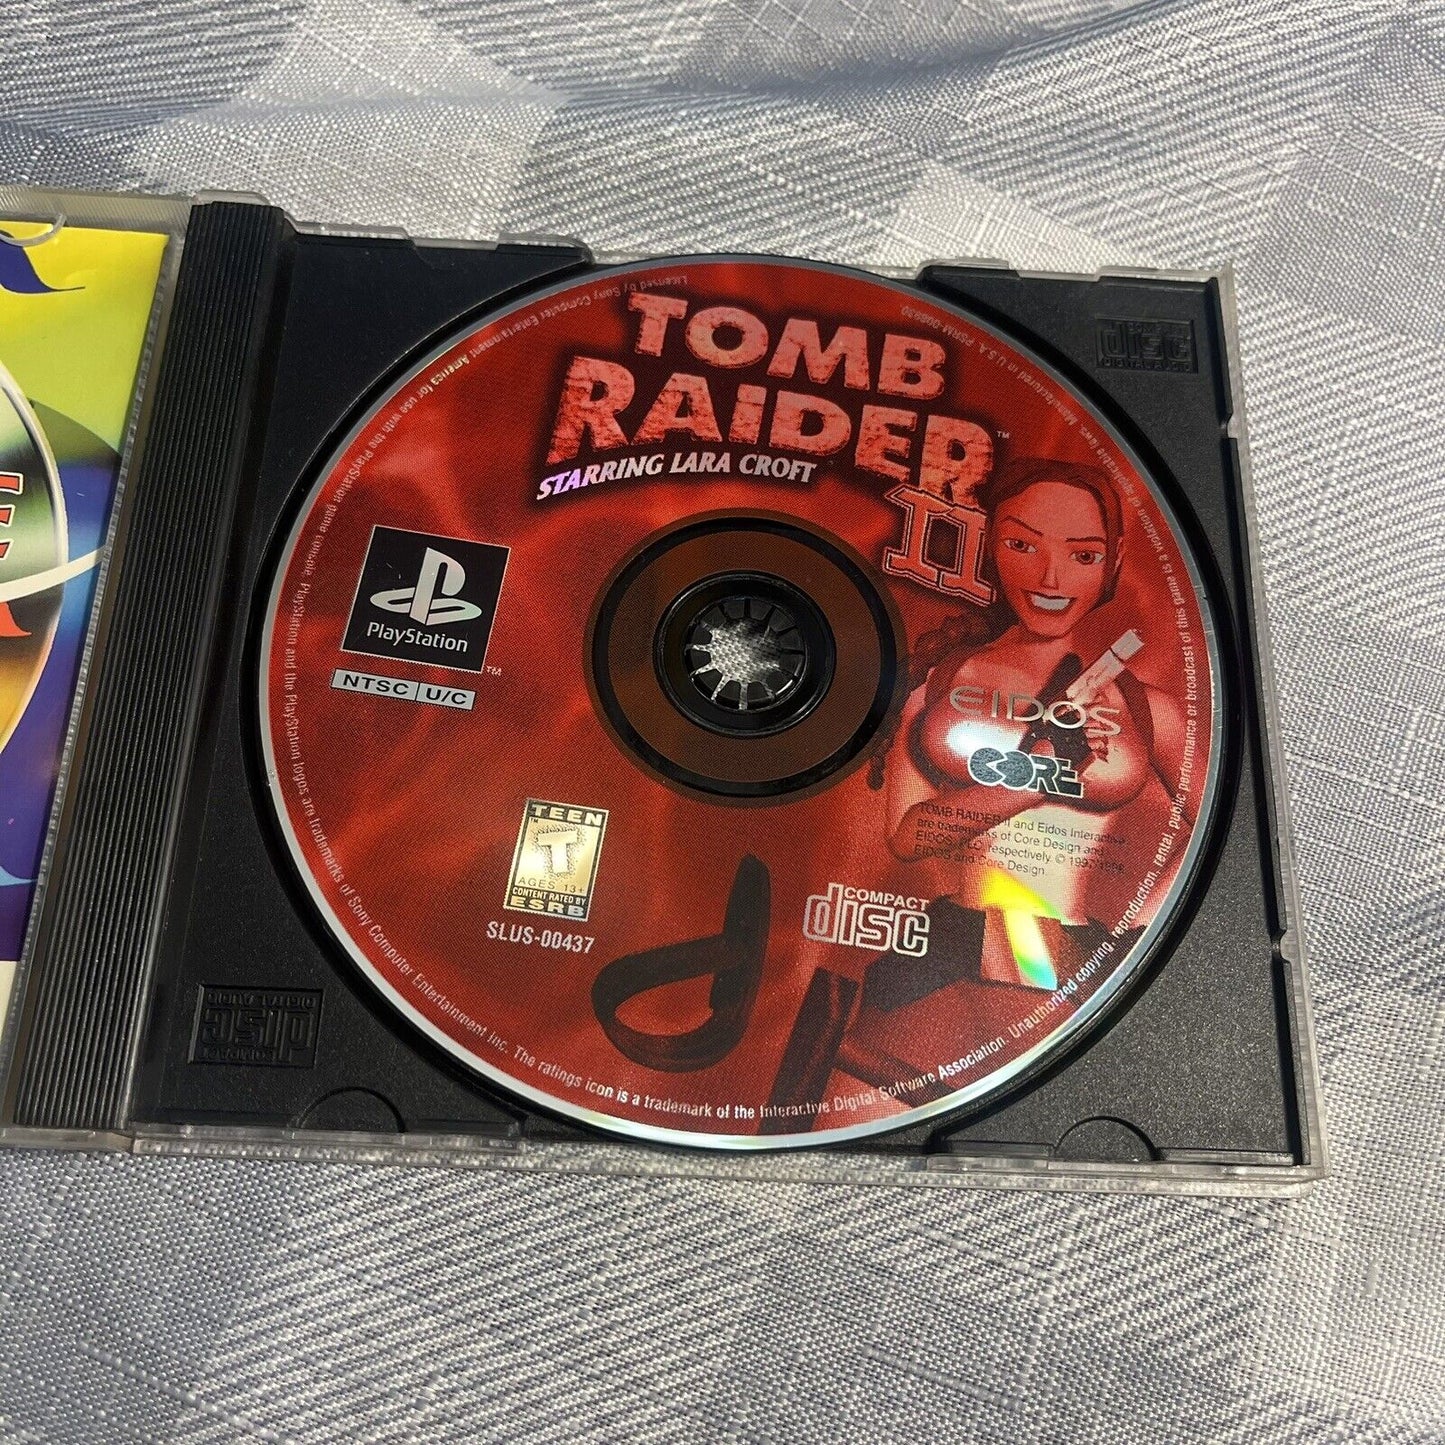 Tomb Raider II 2 Sony Playstation 1 PS1 Game Disc TESTED + WORKING!